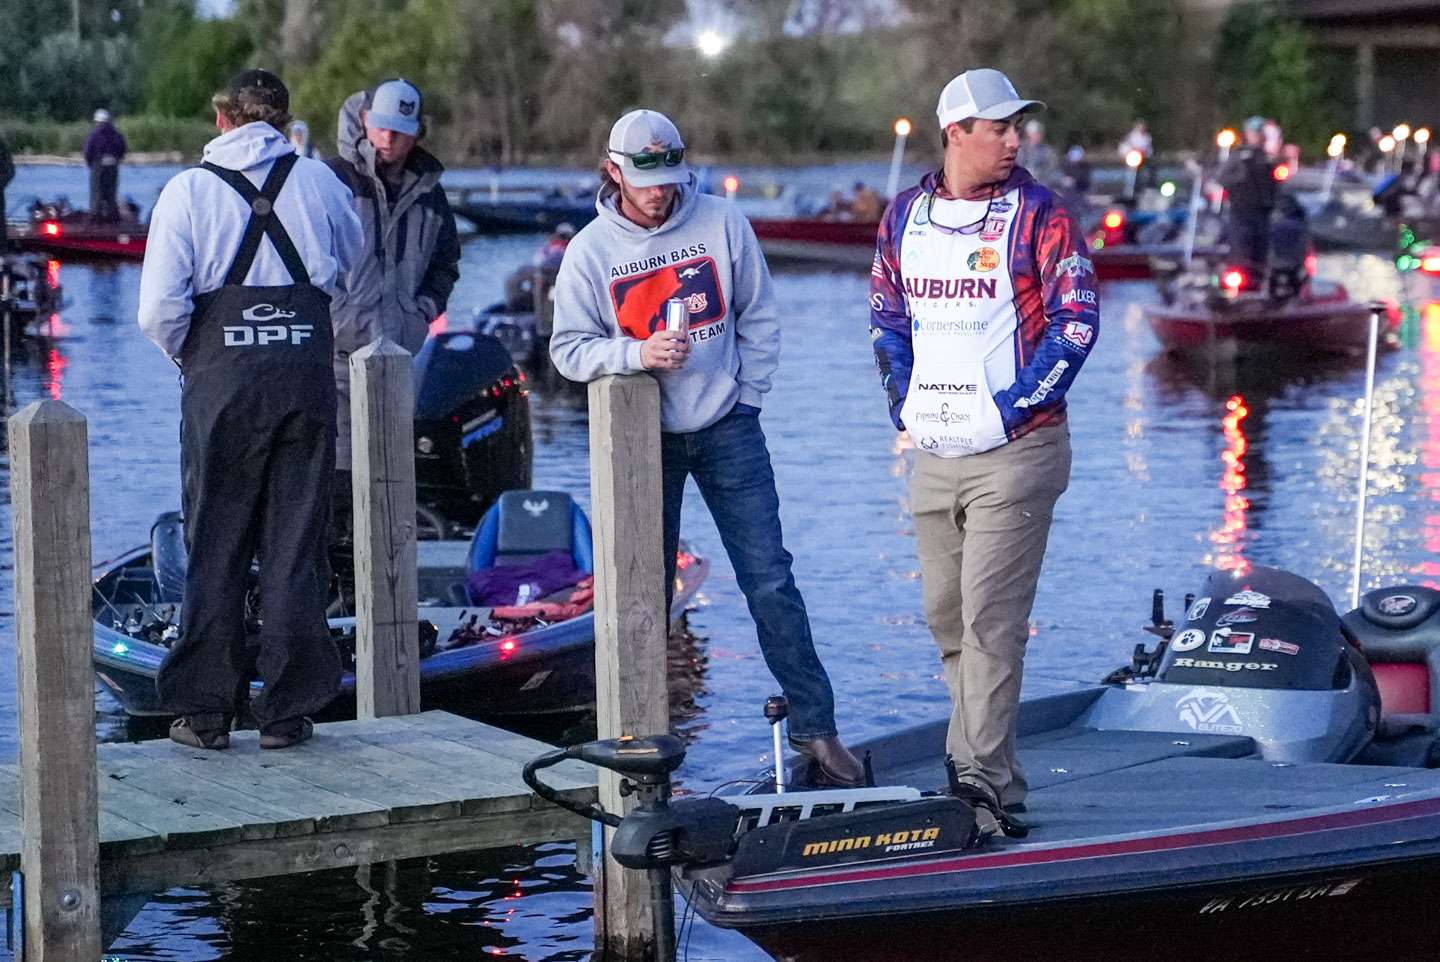 Day 1 of the Carhartt Bassmaster College Series at Saginaw Bay presented by Bass Pro Shops is officially underway! Check out the sights from takeoff on Day 1. 